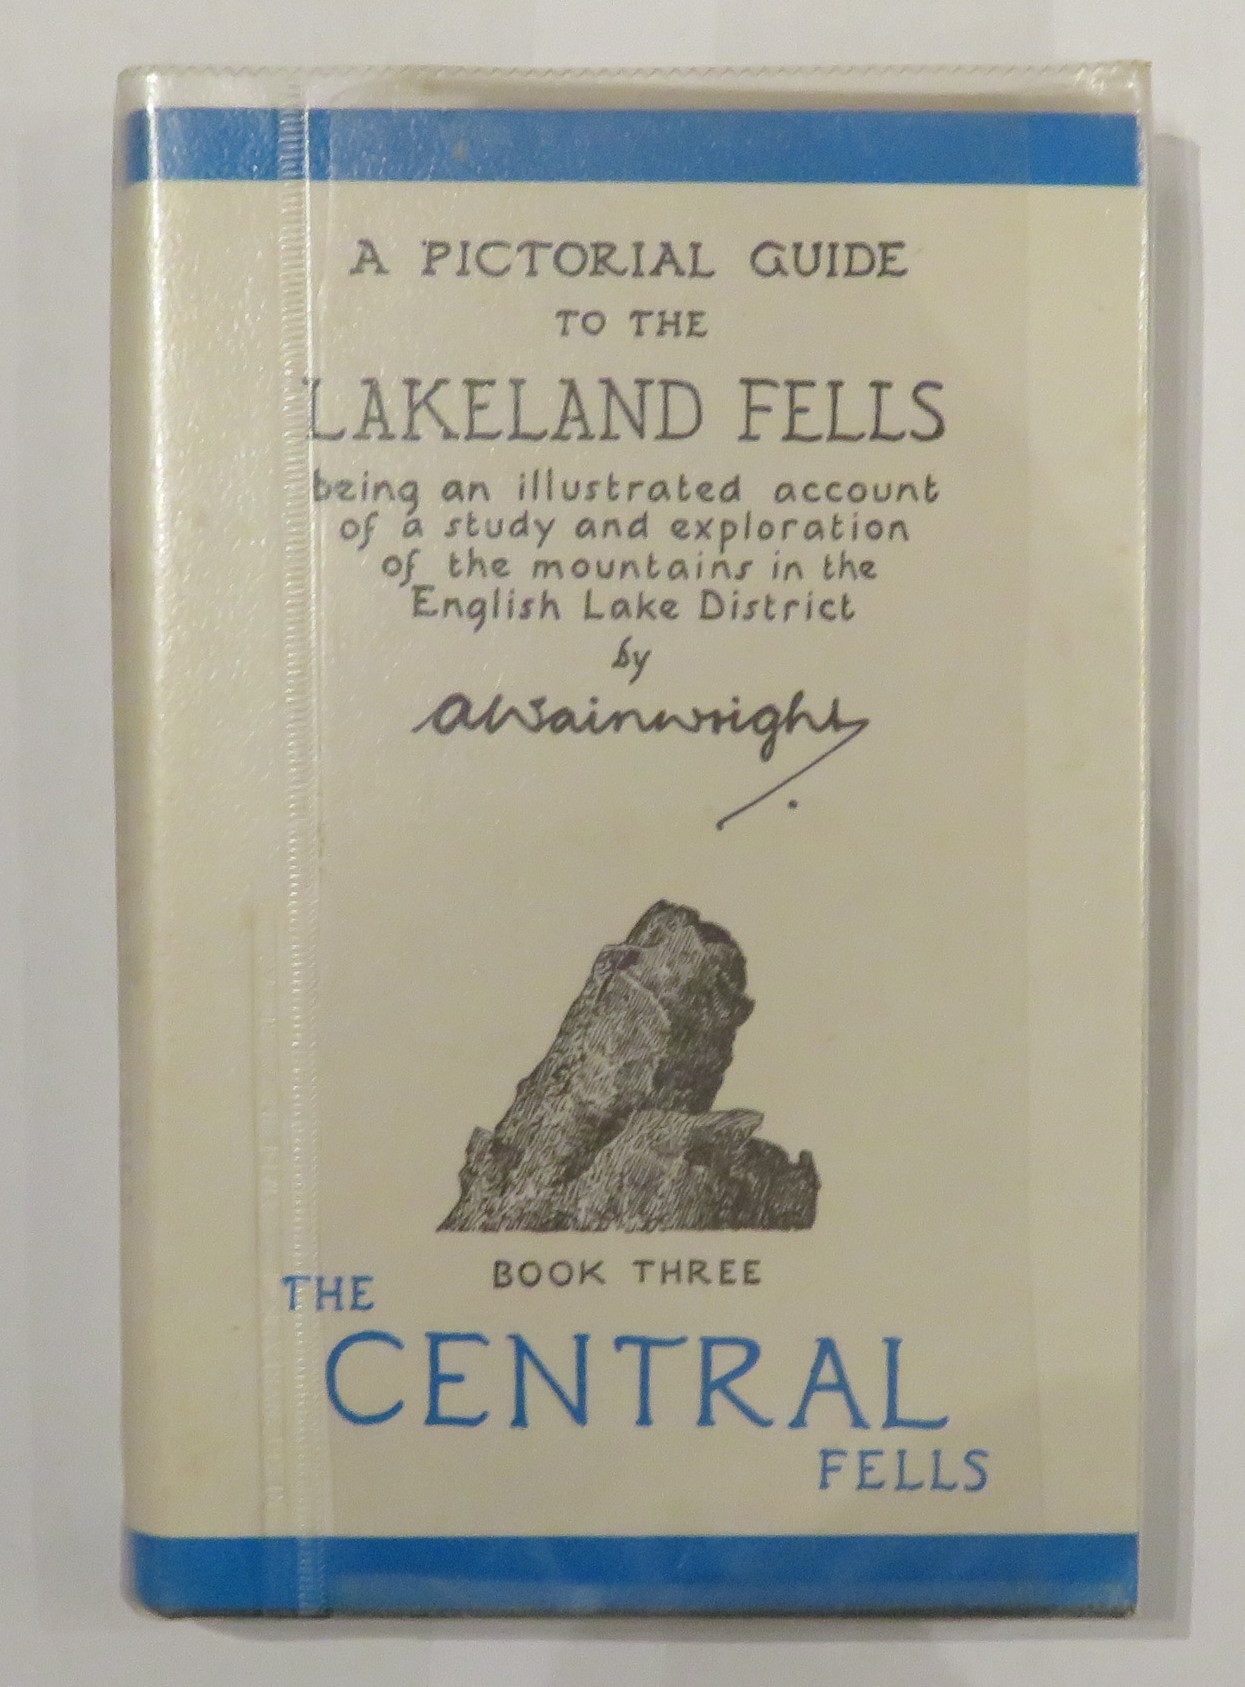 A Pictorial Guide to the Lakeland Fells, Book Three: The Central Fells